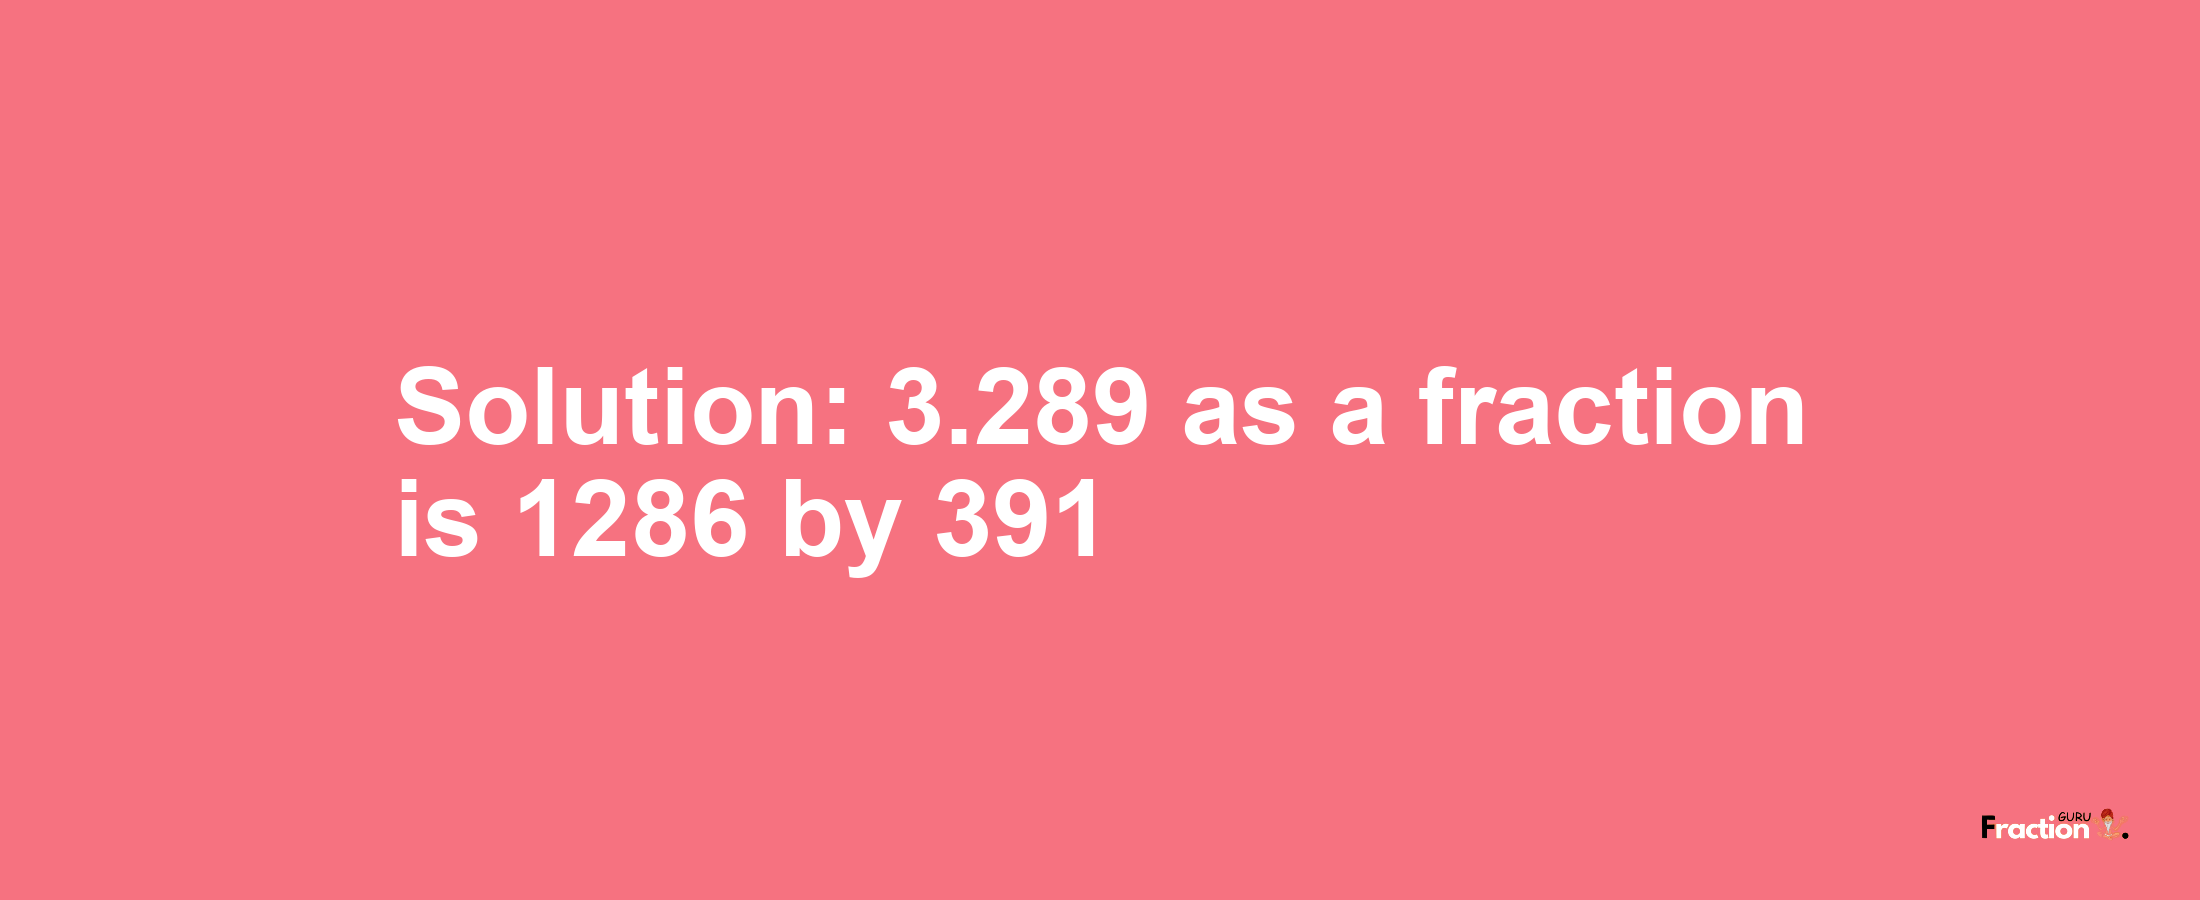 Solution:3.289 as a fraction is 1286/391